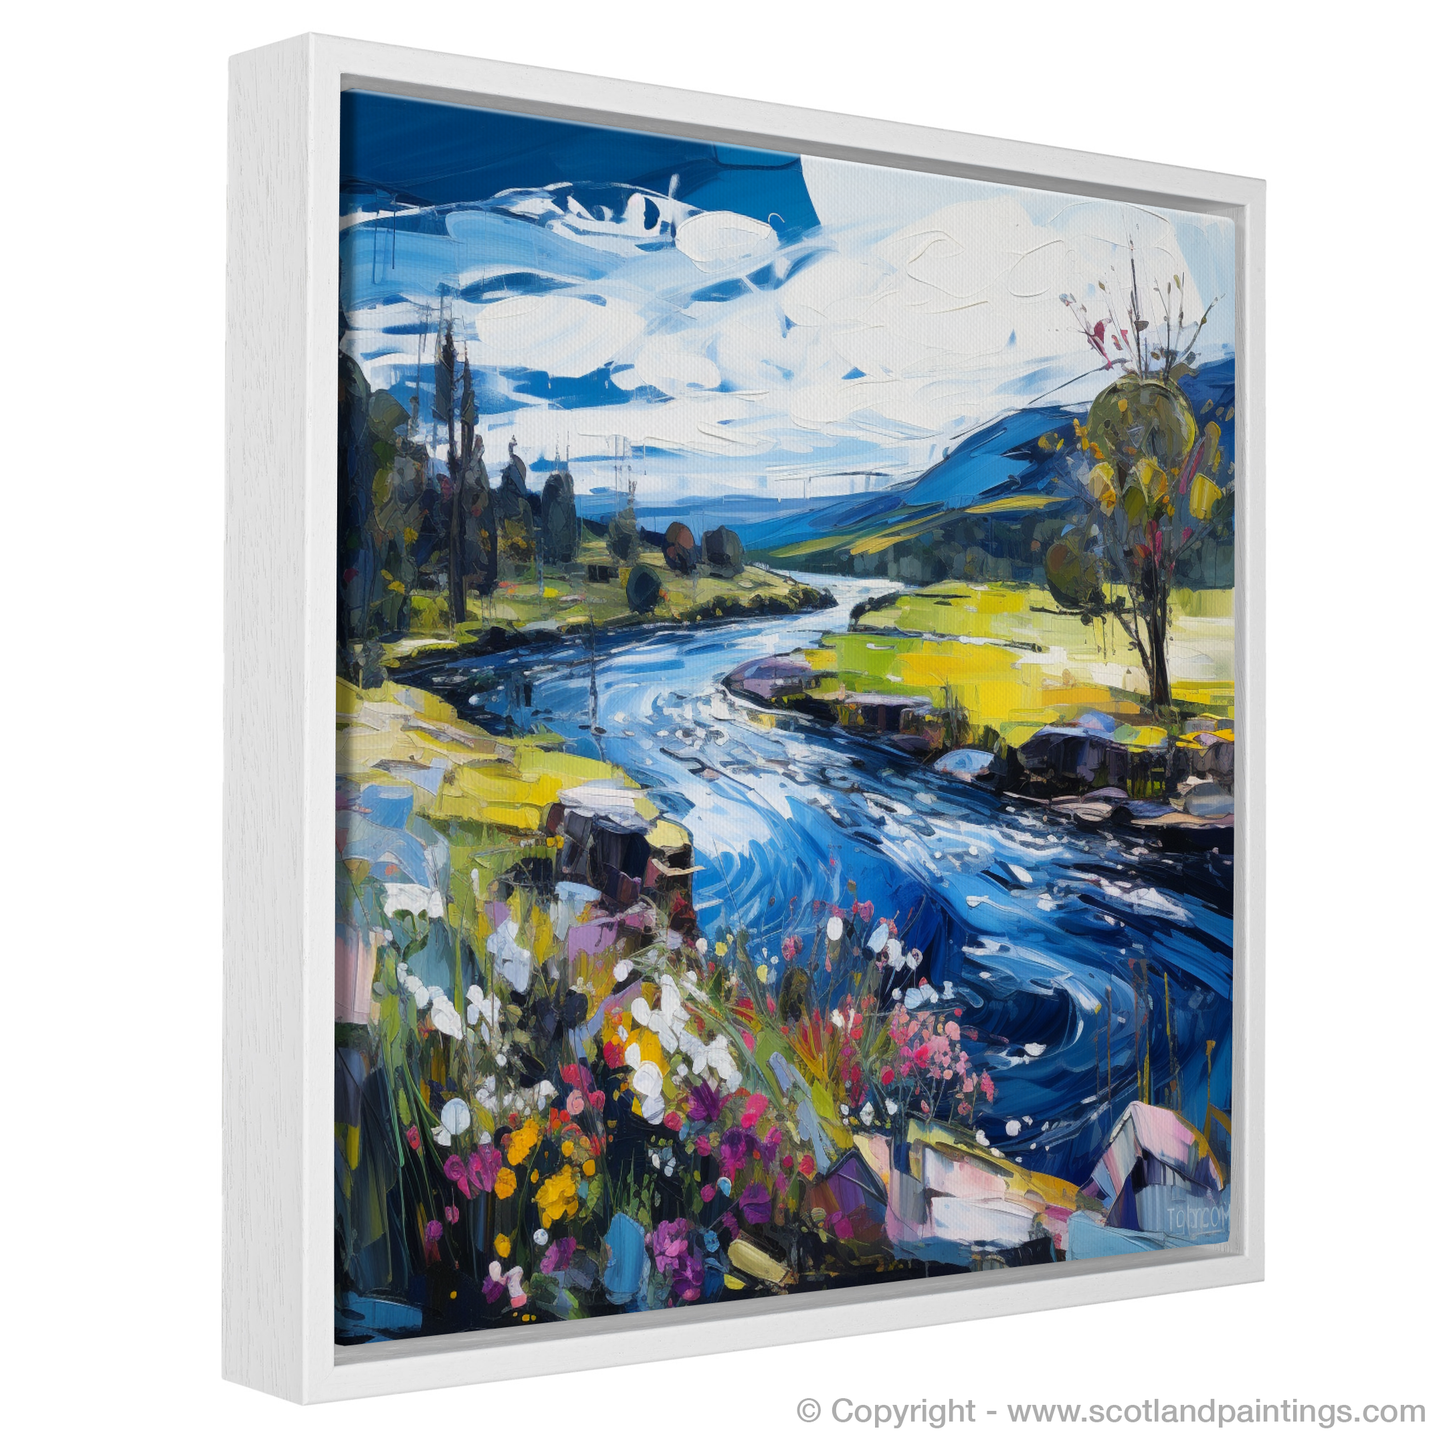 Painting and Art Print of River Carron, Ross-shire. Carron's Rhapsody: An Expressionist Ode to the Highlands.